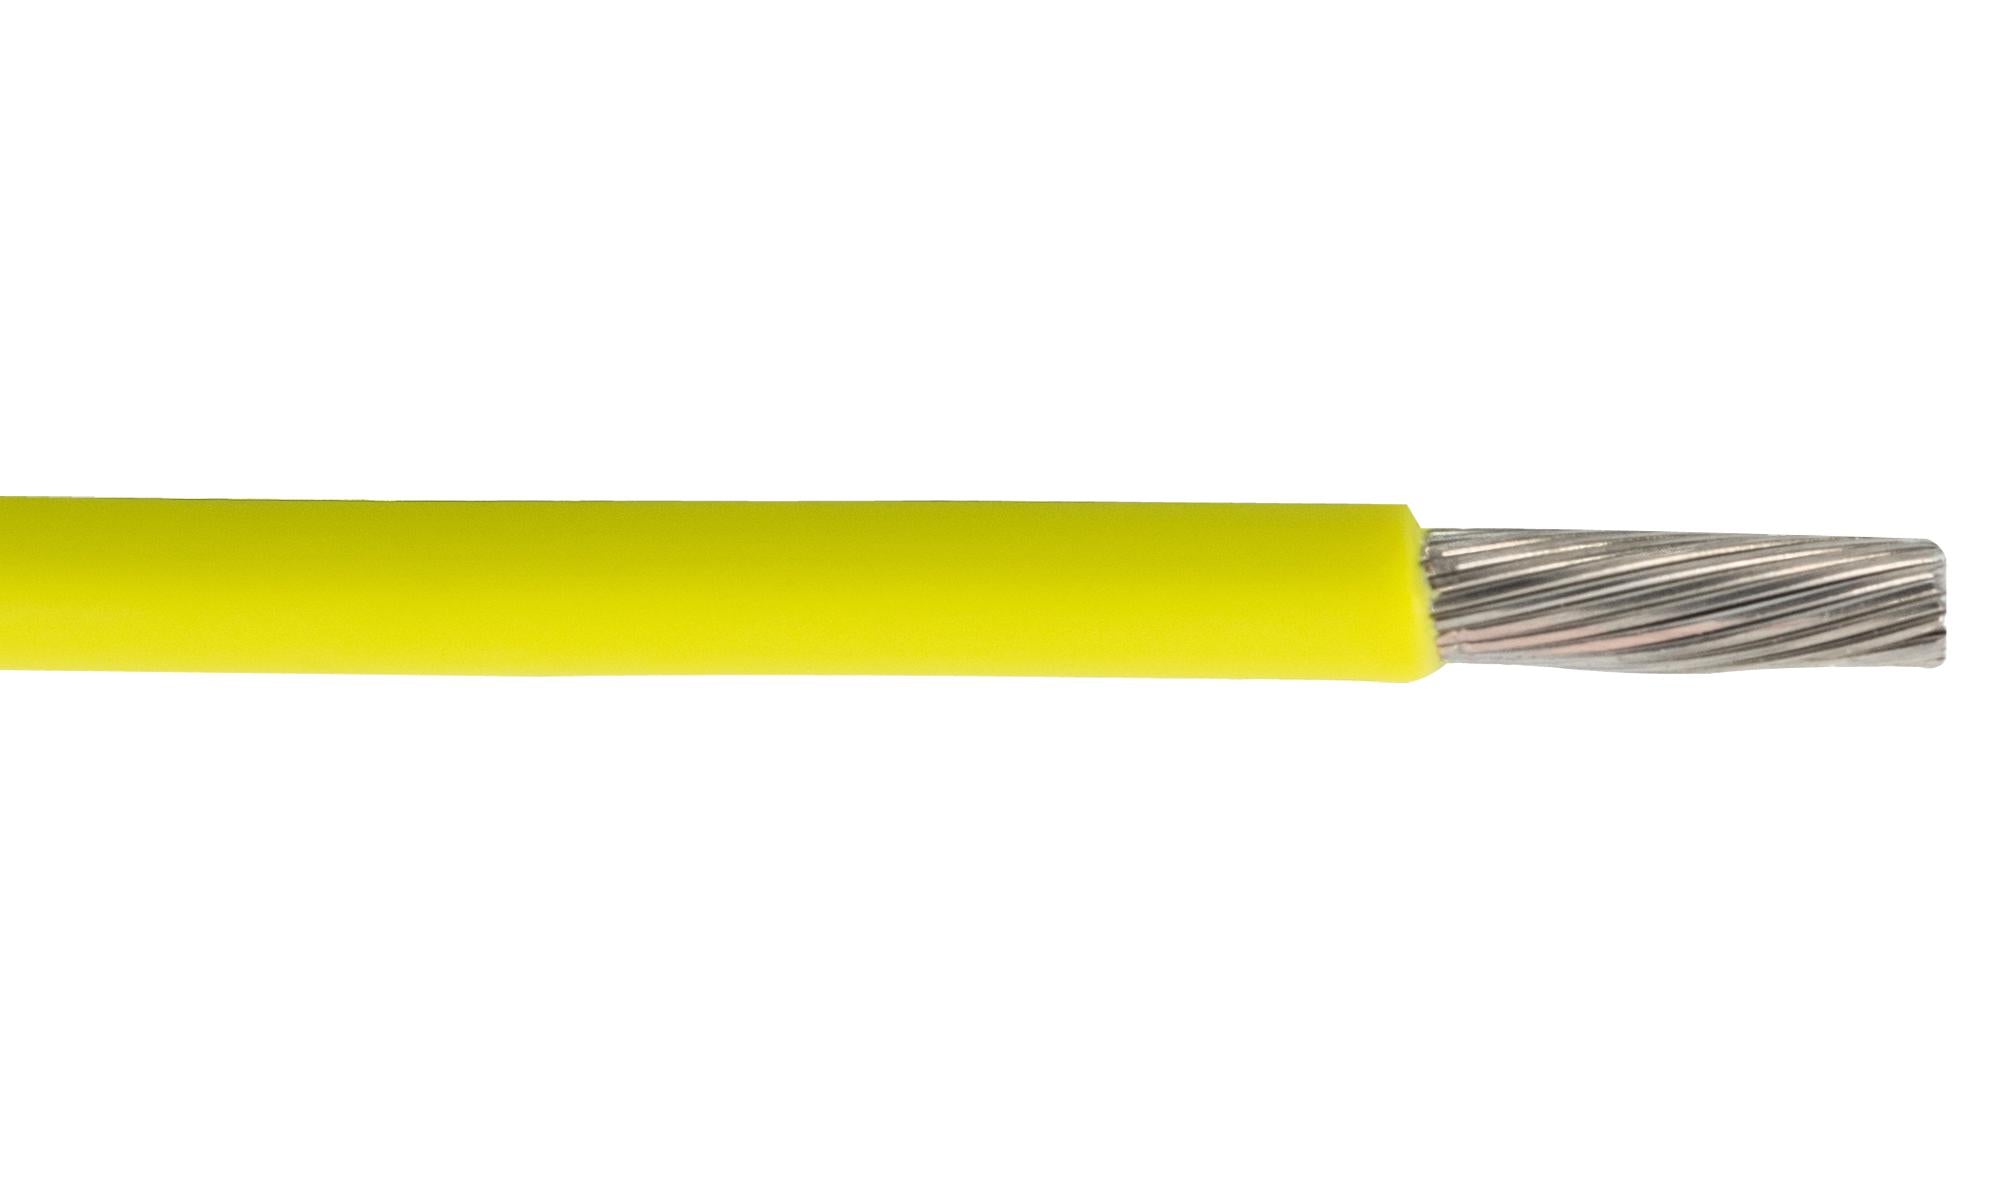 67025 YL033 HOOK-UP WIRE, 0.25MM2, YELLOW, 328FT ALPHA WIRE